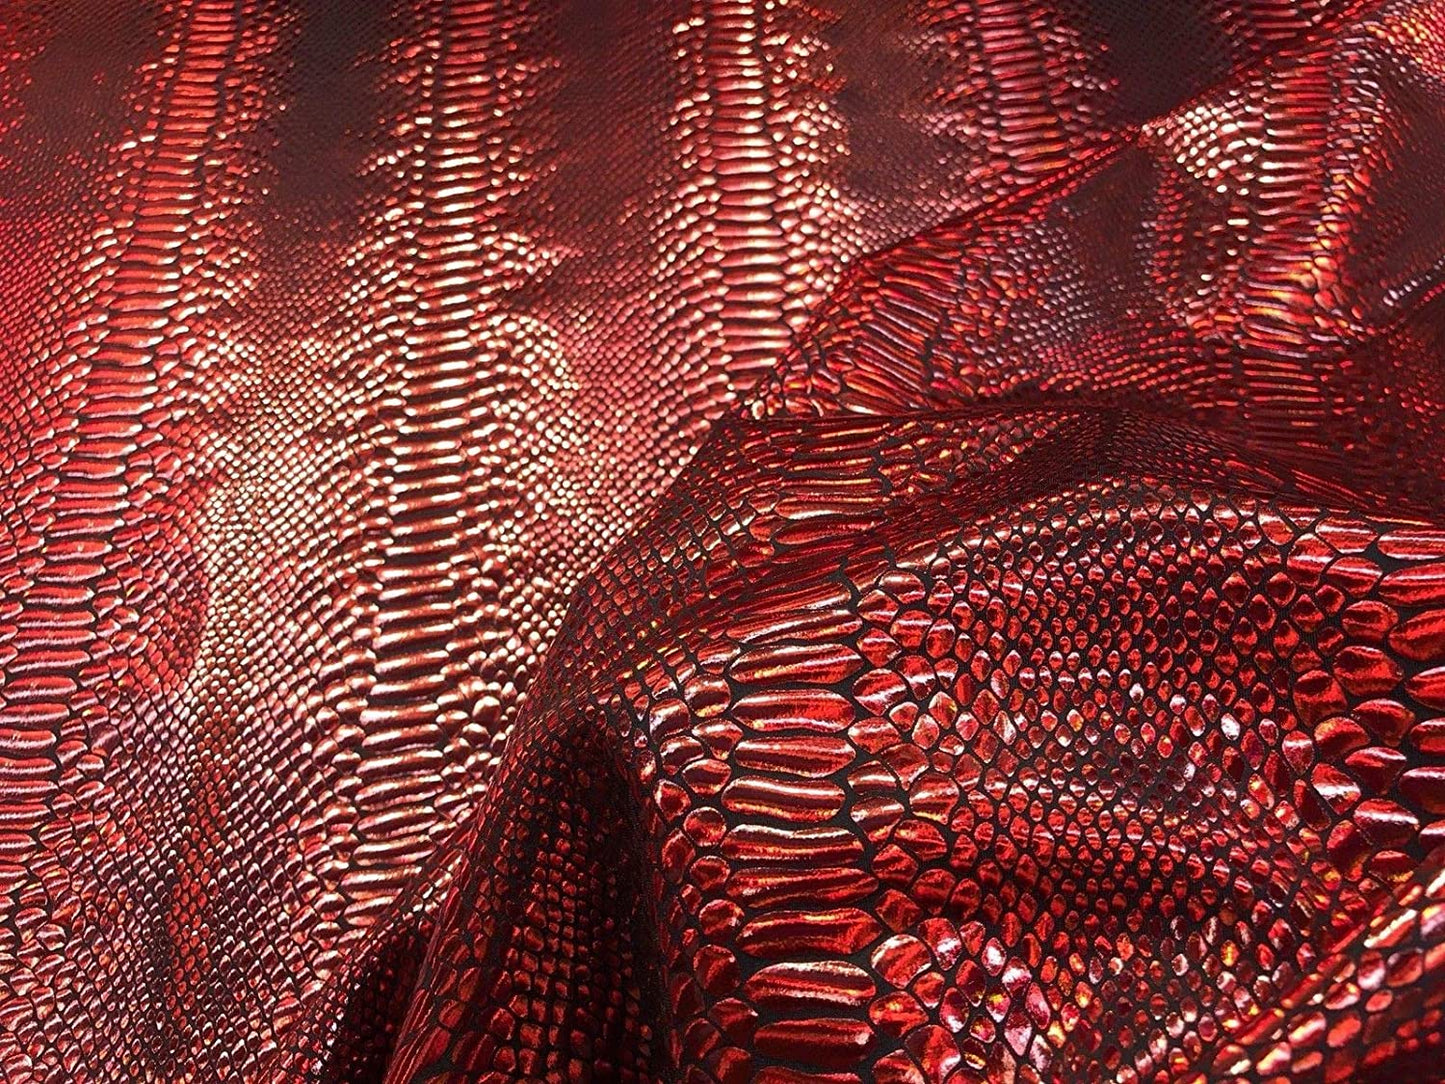 Iridescent Snake Skin Print On A Nylon 2 Way Stretch Spandex Fabric BY The Yard. (Red on Black)